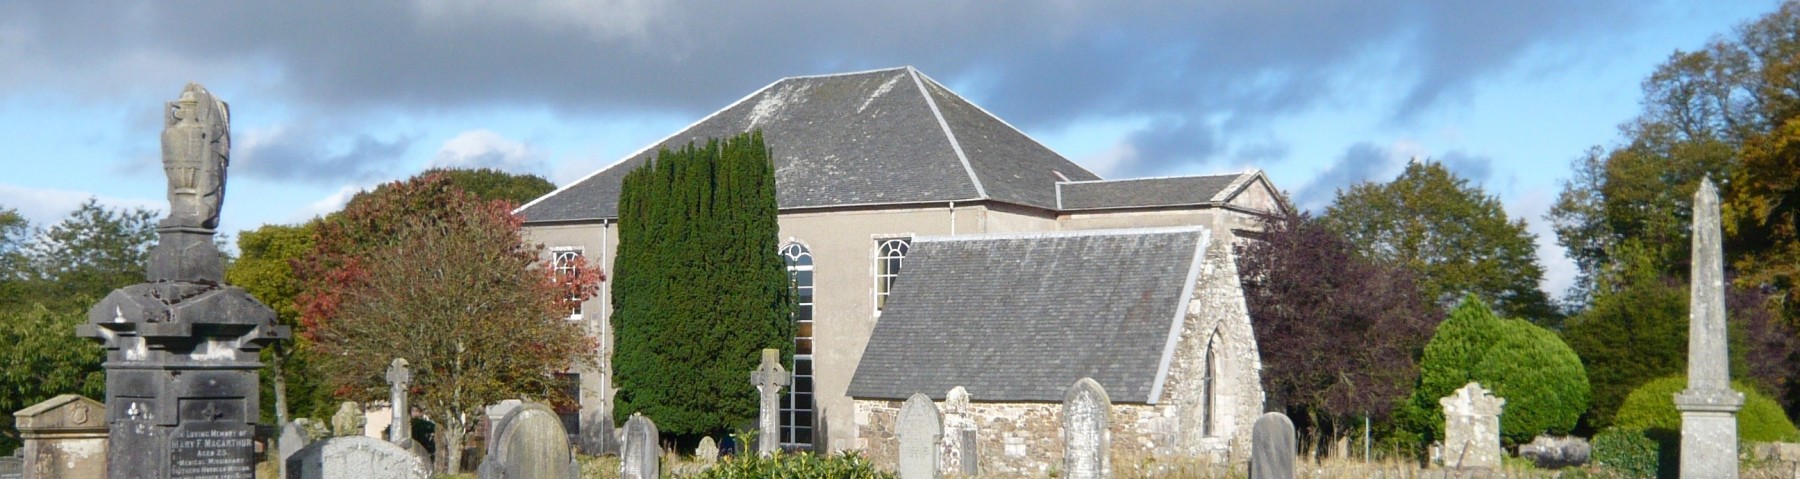 The United Church of Bute